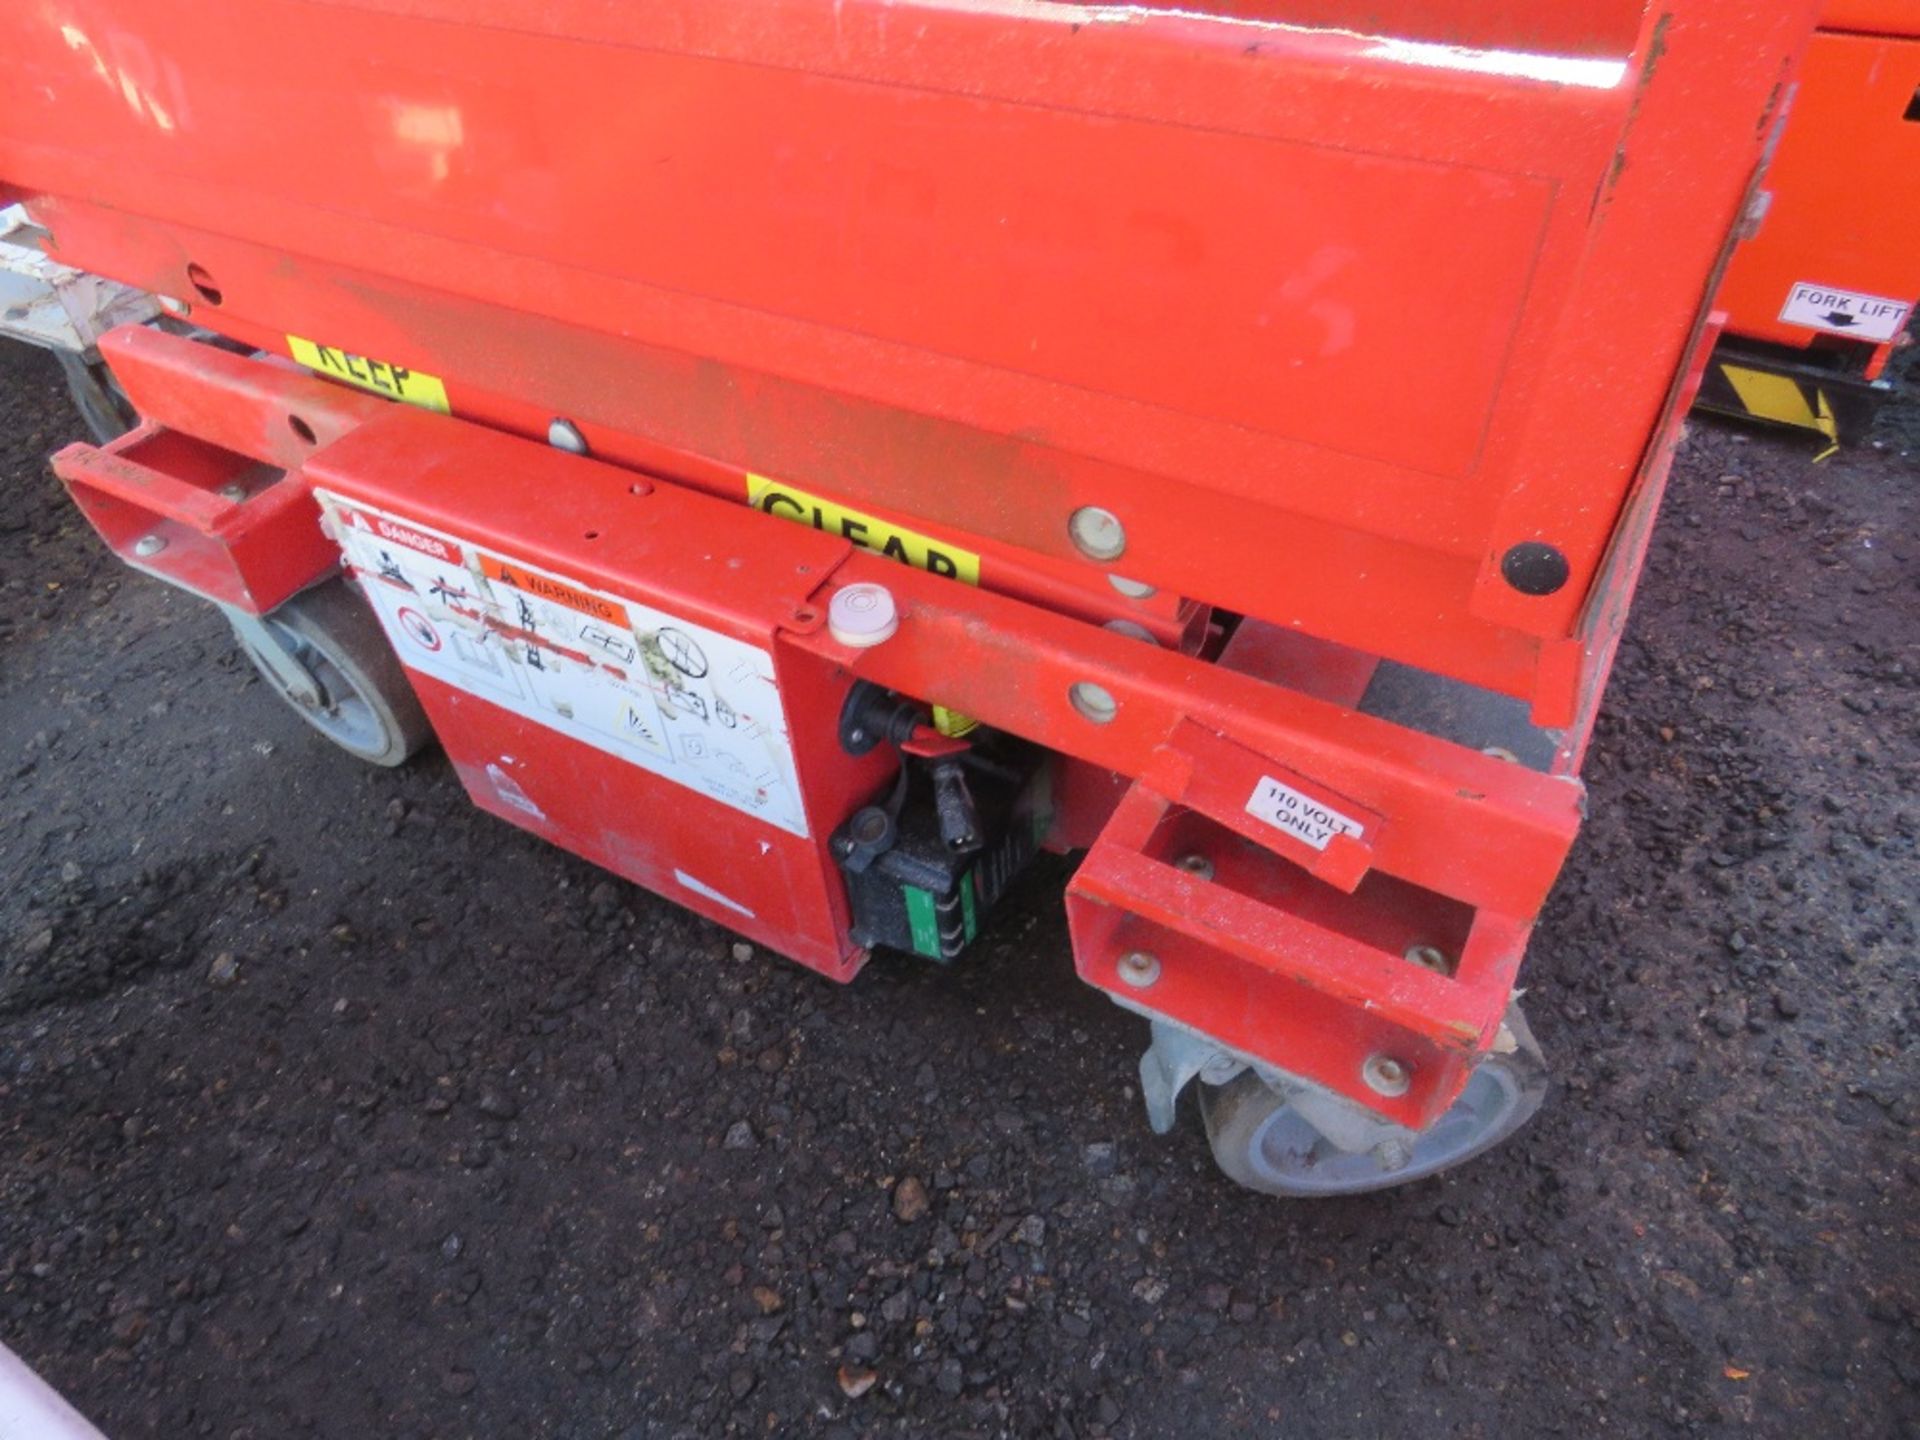 HYBRID HBP3.6 RED BATTERY POWERED ACCESS PLATFORM, 3.6M MAX WORKING HEIGHT. PN:E04/10146. - Image 3 of 6